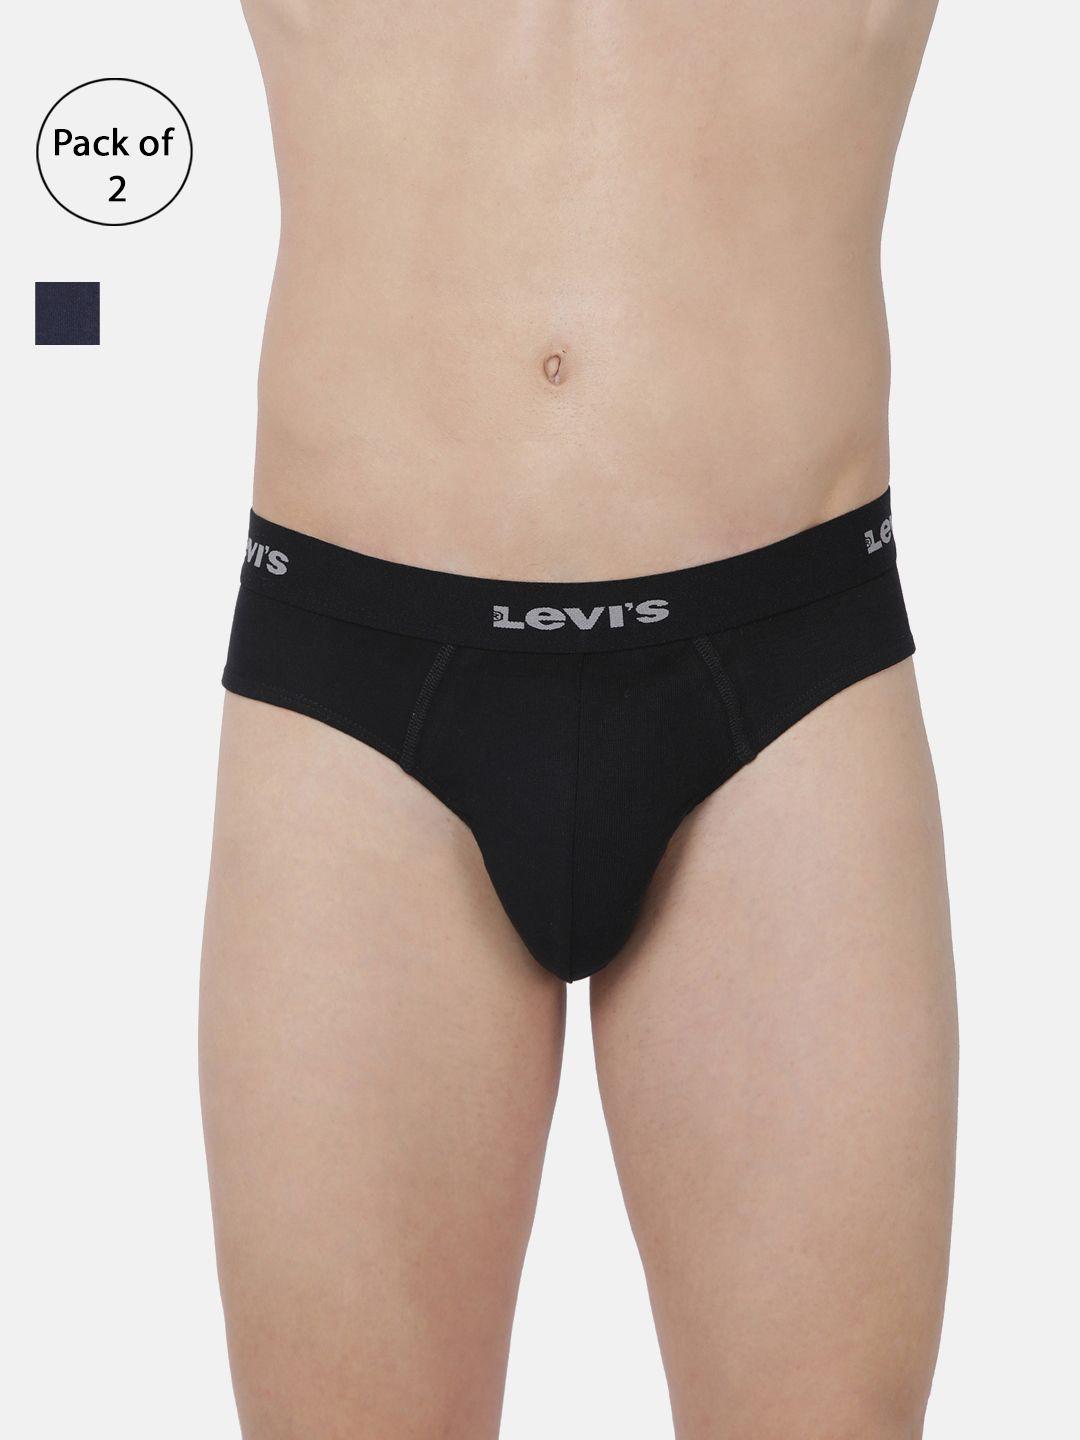 levis-pack-of-2-smartskin-technology-cotton-briefs-with-tag-free-comfort-#002-brief